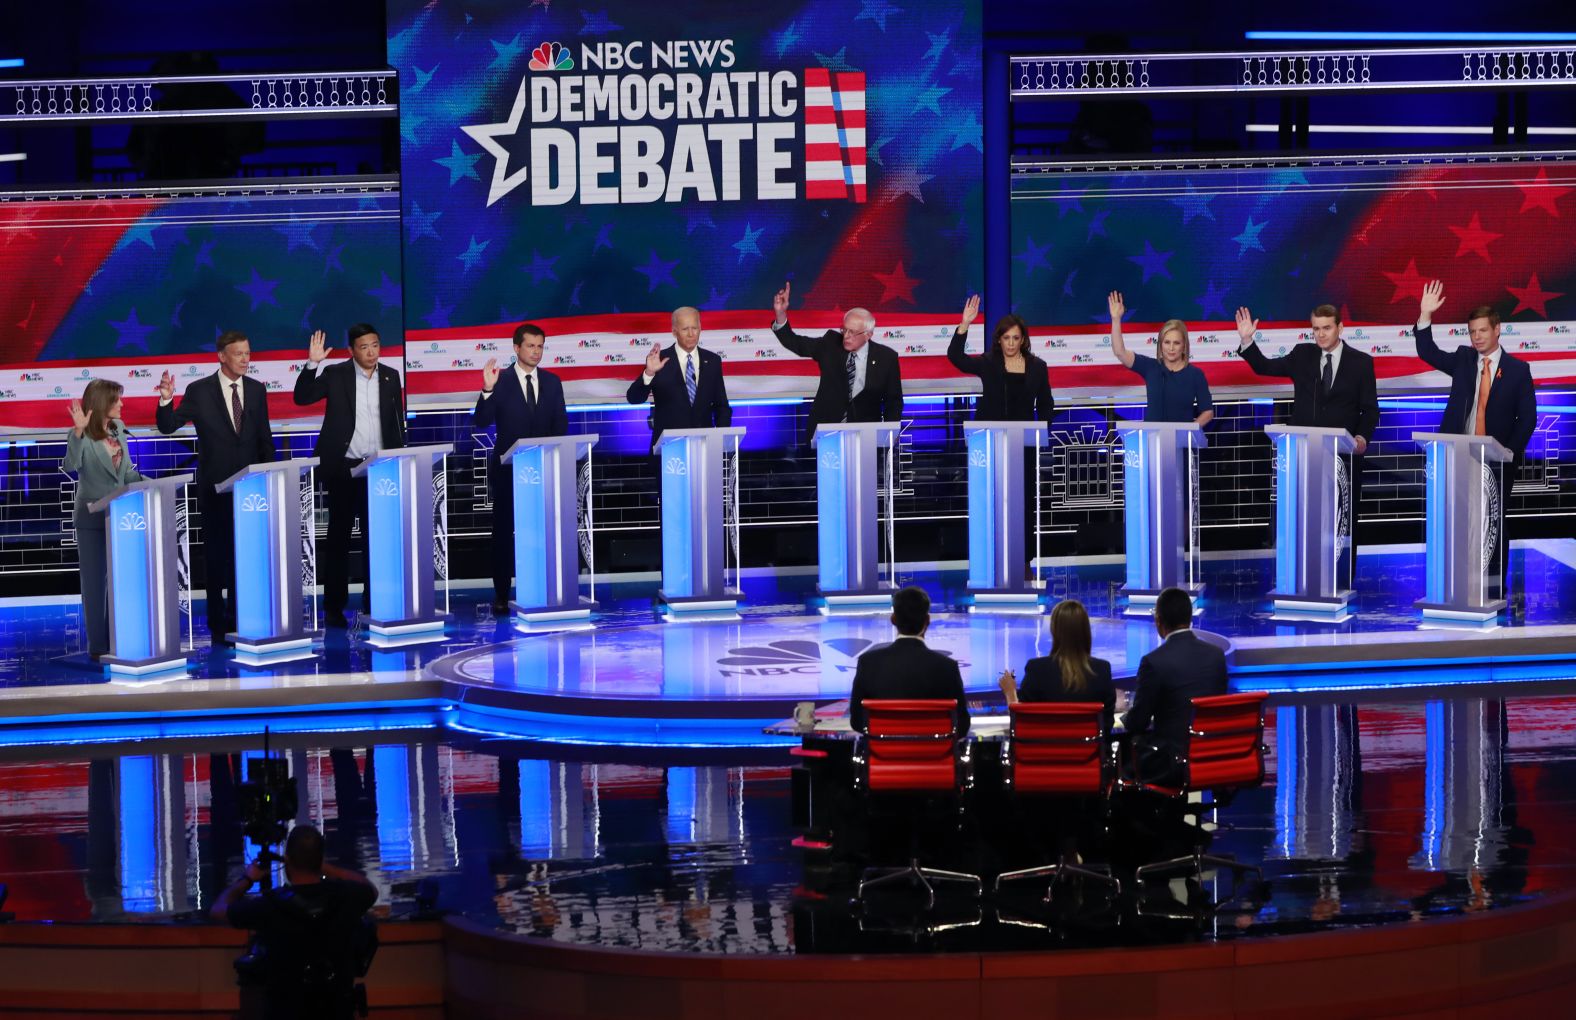 NBC's Savannah Guthrie asked Thursday's candidates to raise their hands if their government plan would provide health-care coverage to undocumented immigrants. <a href="index.php?page=&url=https%3A%2F%2Fwww.cnn.com%2Fpolitics%2Flive-news%2Fdemocratic-debate-june-27-2019%2Fh_88c6bcdb276fa7b858c5073440952520" target="_blank">All of the candidates raised their hands.</a>